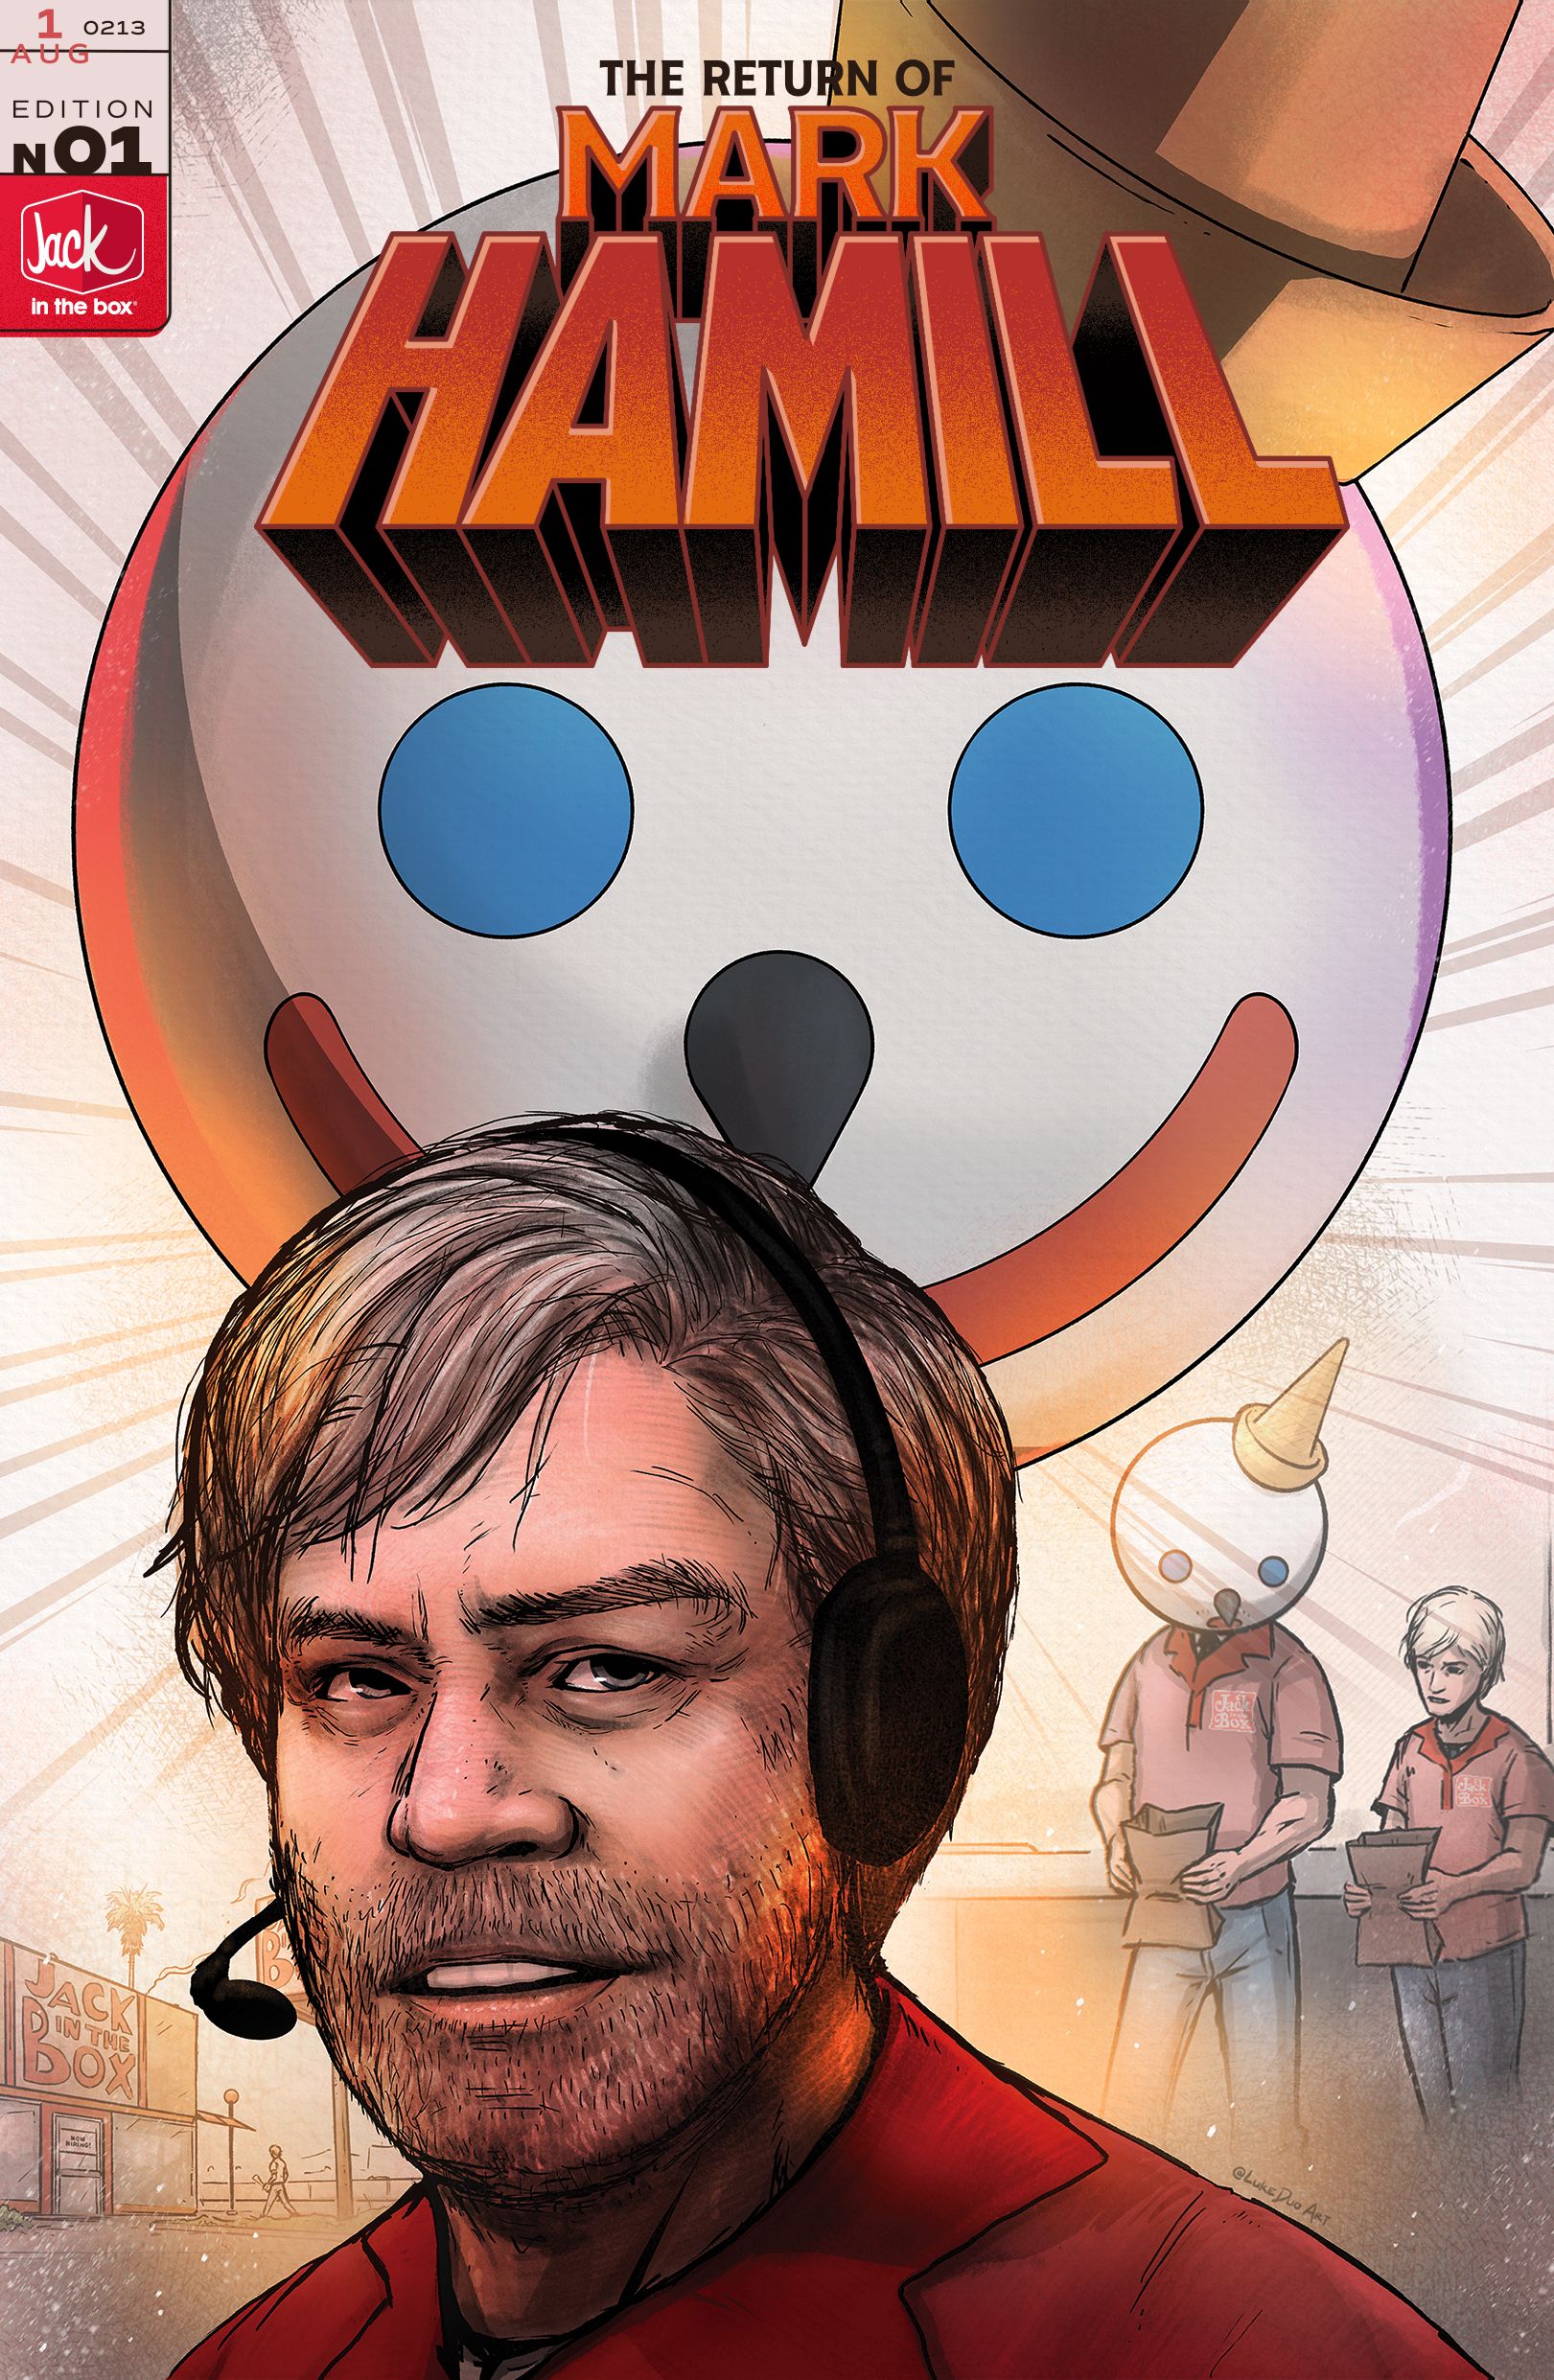 Mark Hamill Teams With Jack in the Box for Free Promotional Comic Book